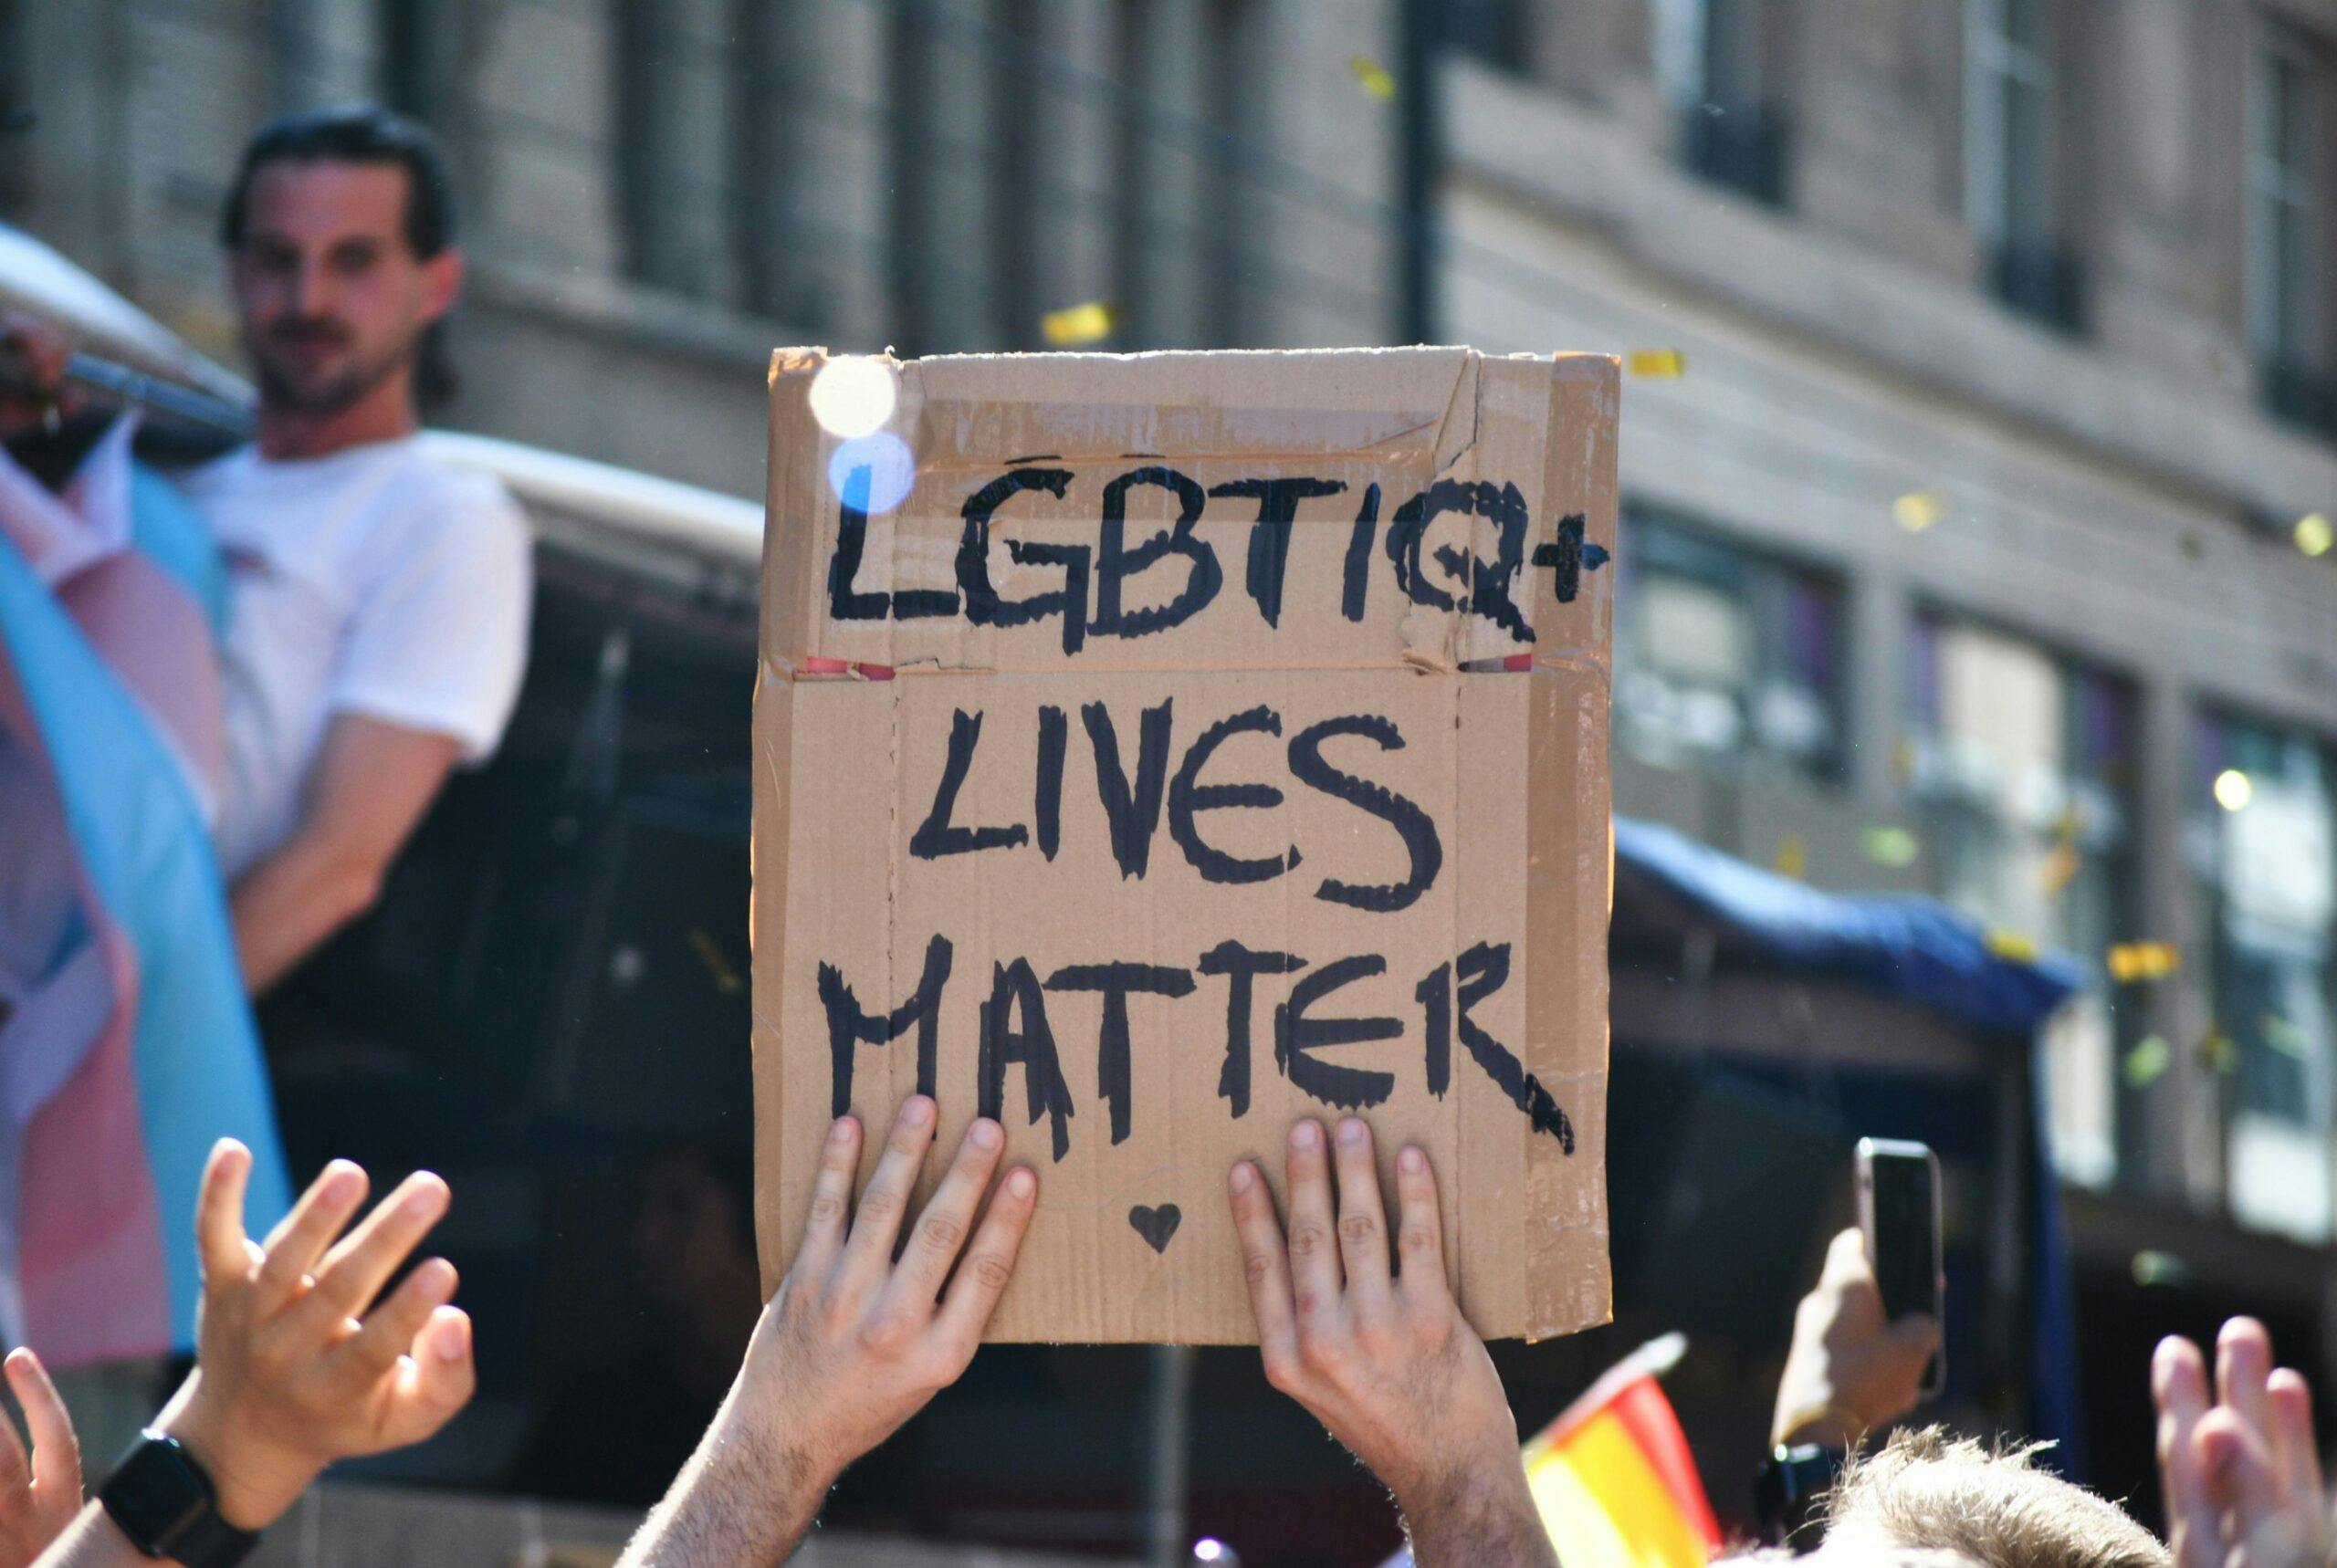 A cardboard sign raised in the air at a Pride march that reads "LGBTIQ+ Lives Matter"